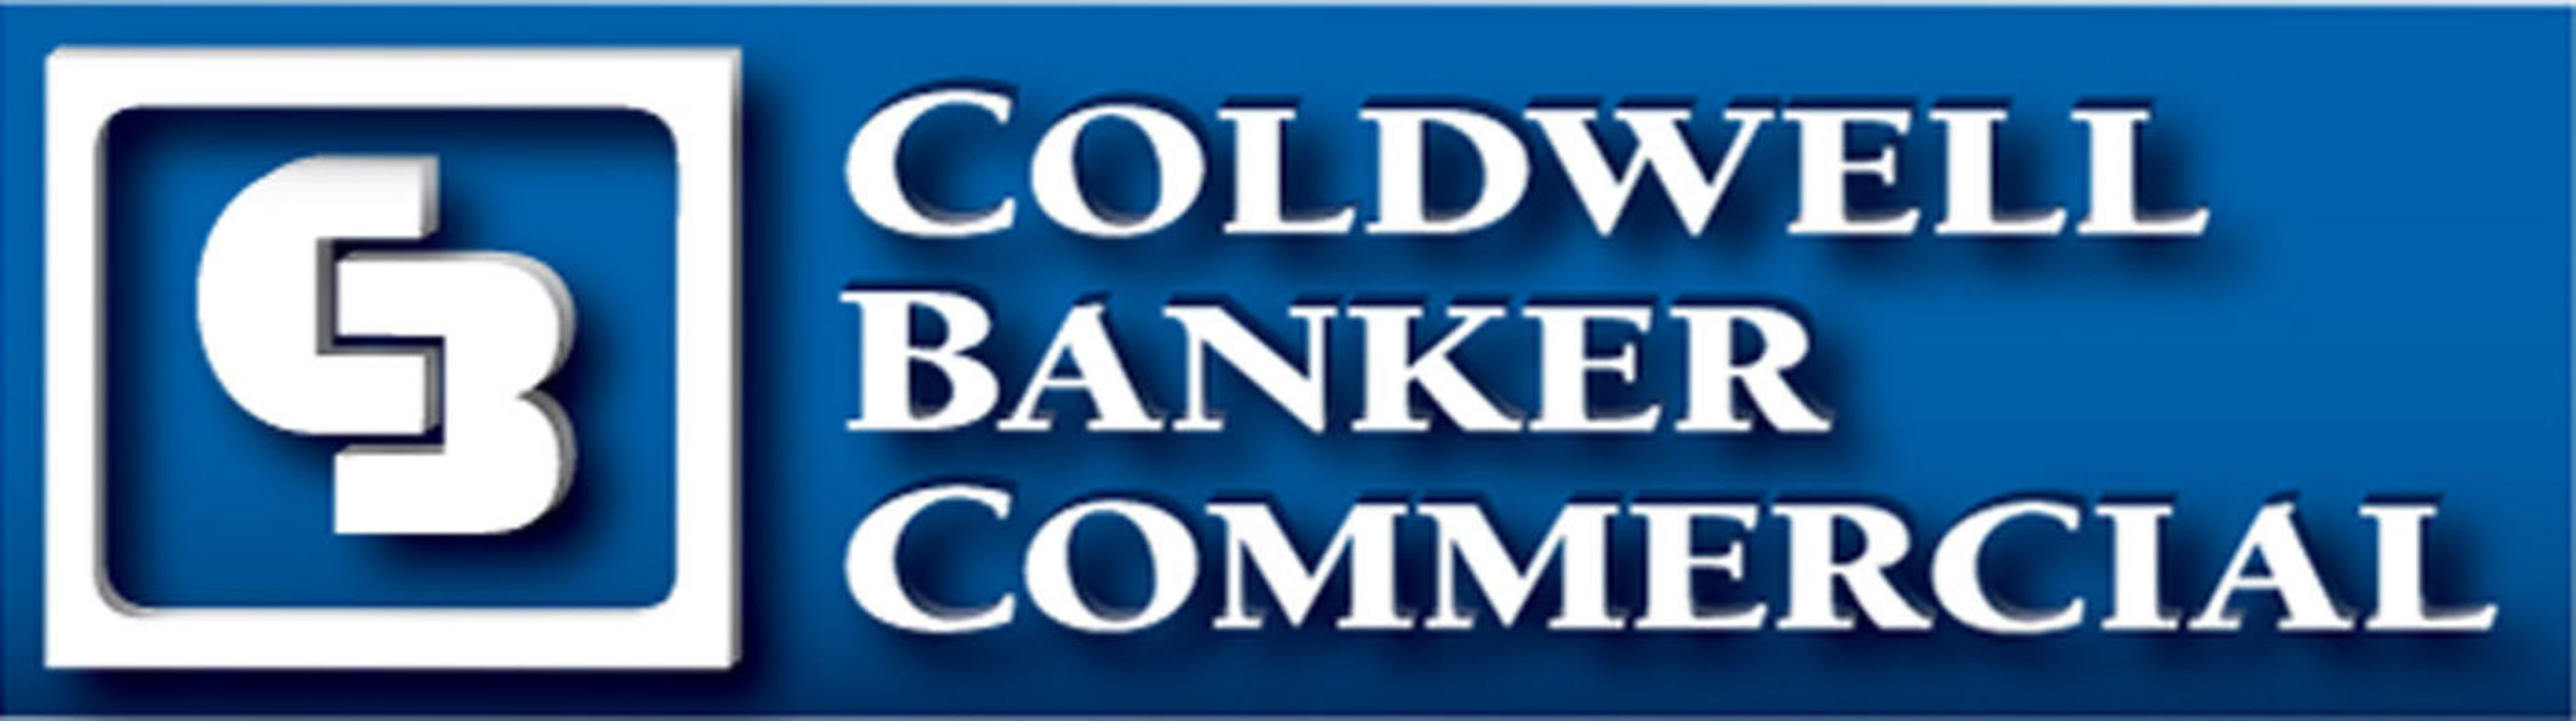 coldwell banker commercial orlando